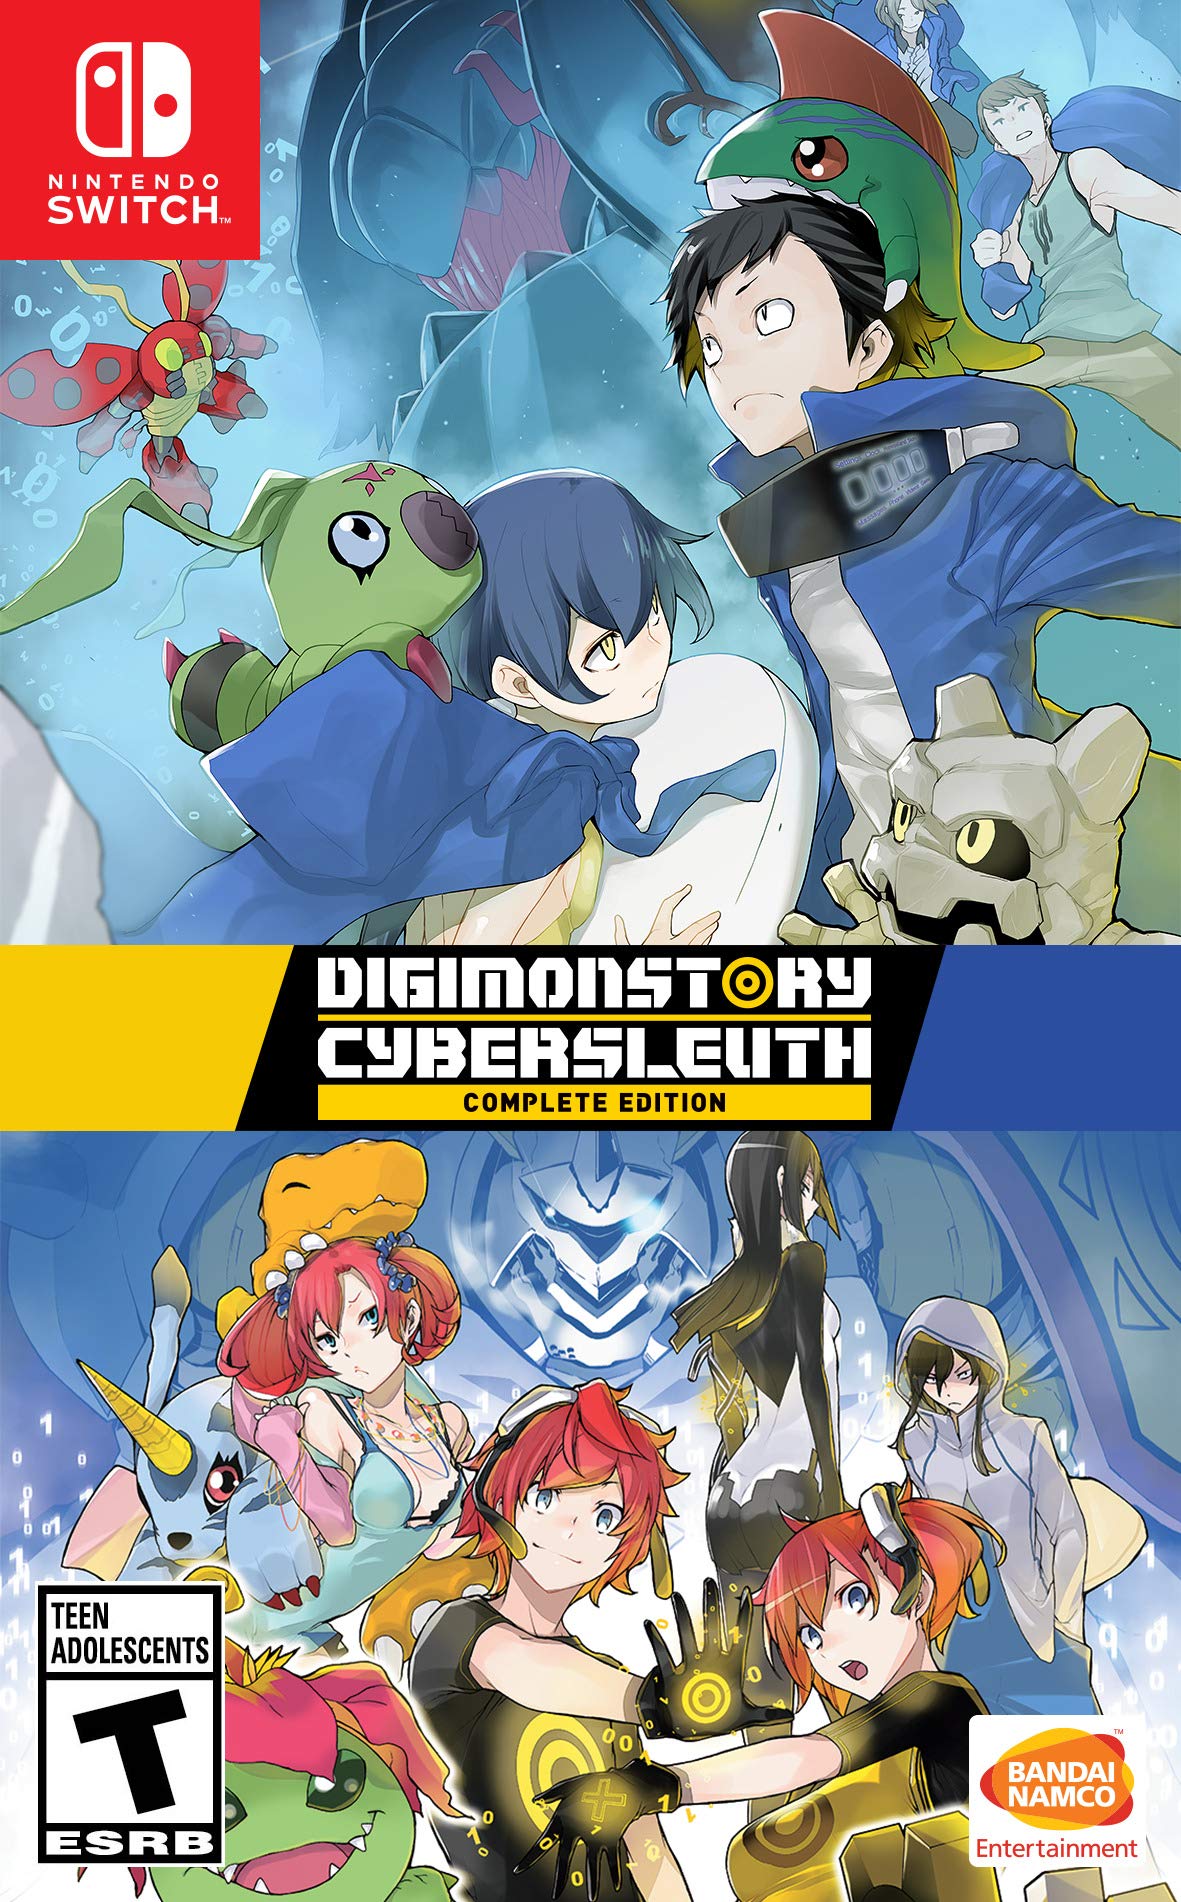 pas cher Digimon Story Cyber Sleuth: Complete Edition (Import) qf7Woxpxs meilleure vente